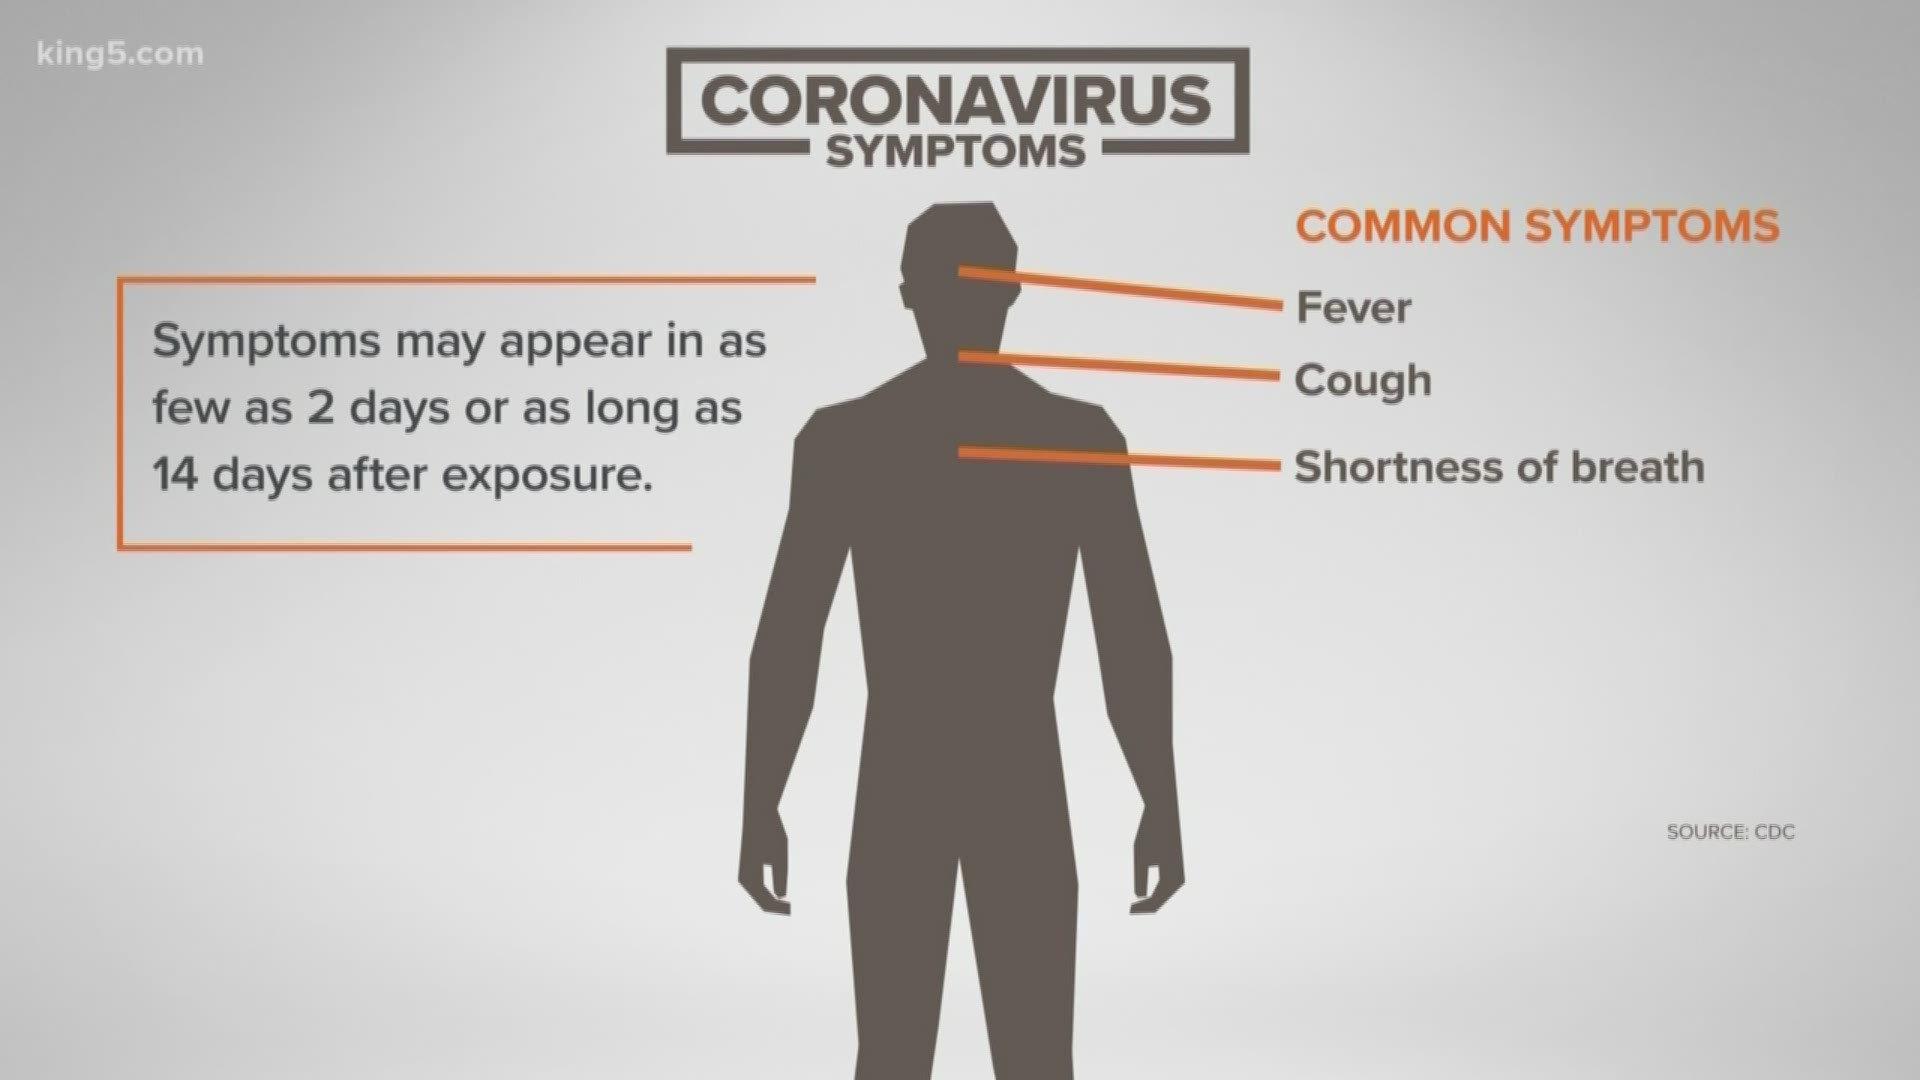 The common symptoms of the novel coronavirus, or COVID-19, are fever, cough, and shortness of breath. Symptoms may appear in as few as 2 days or as long as 14 days.